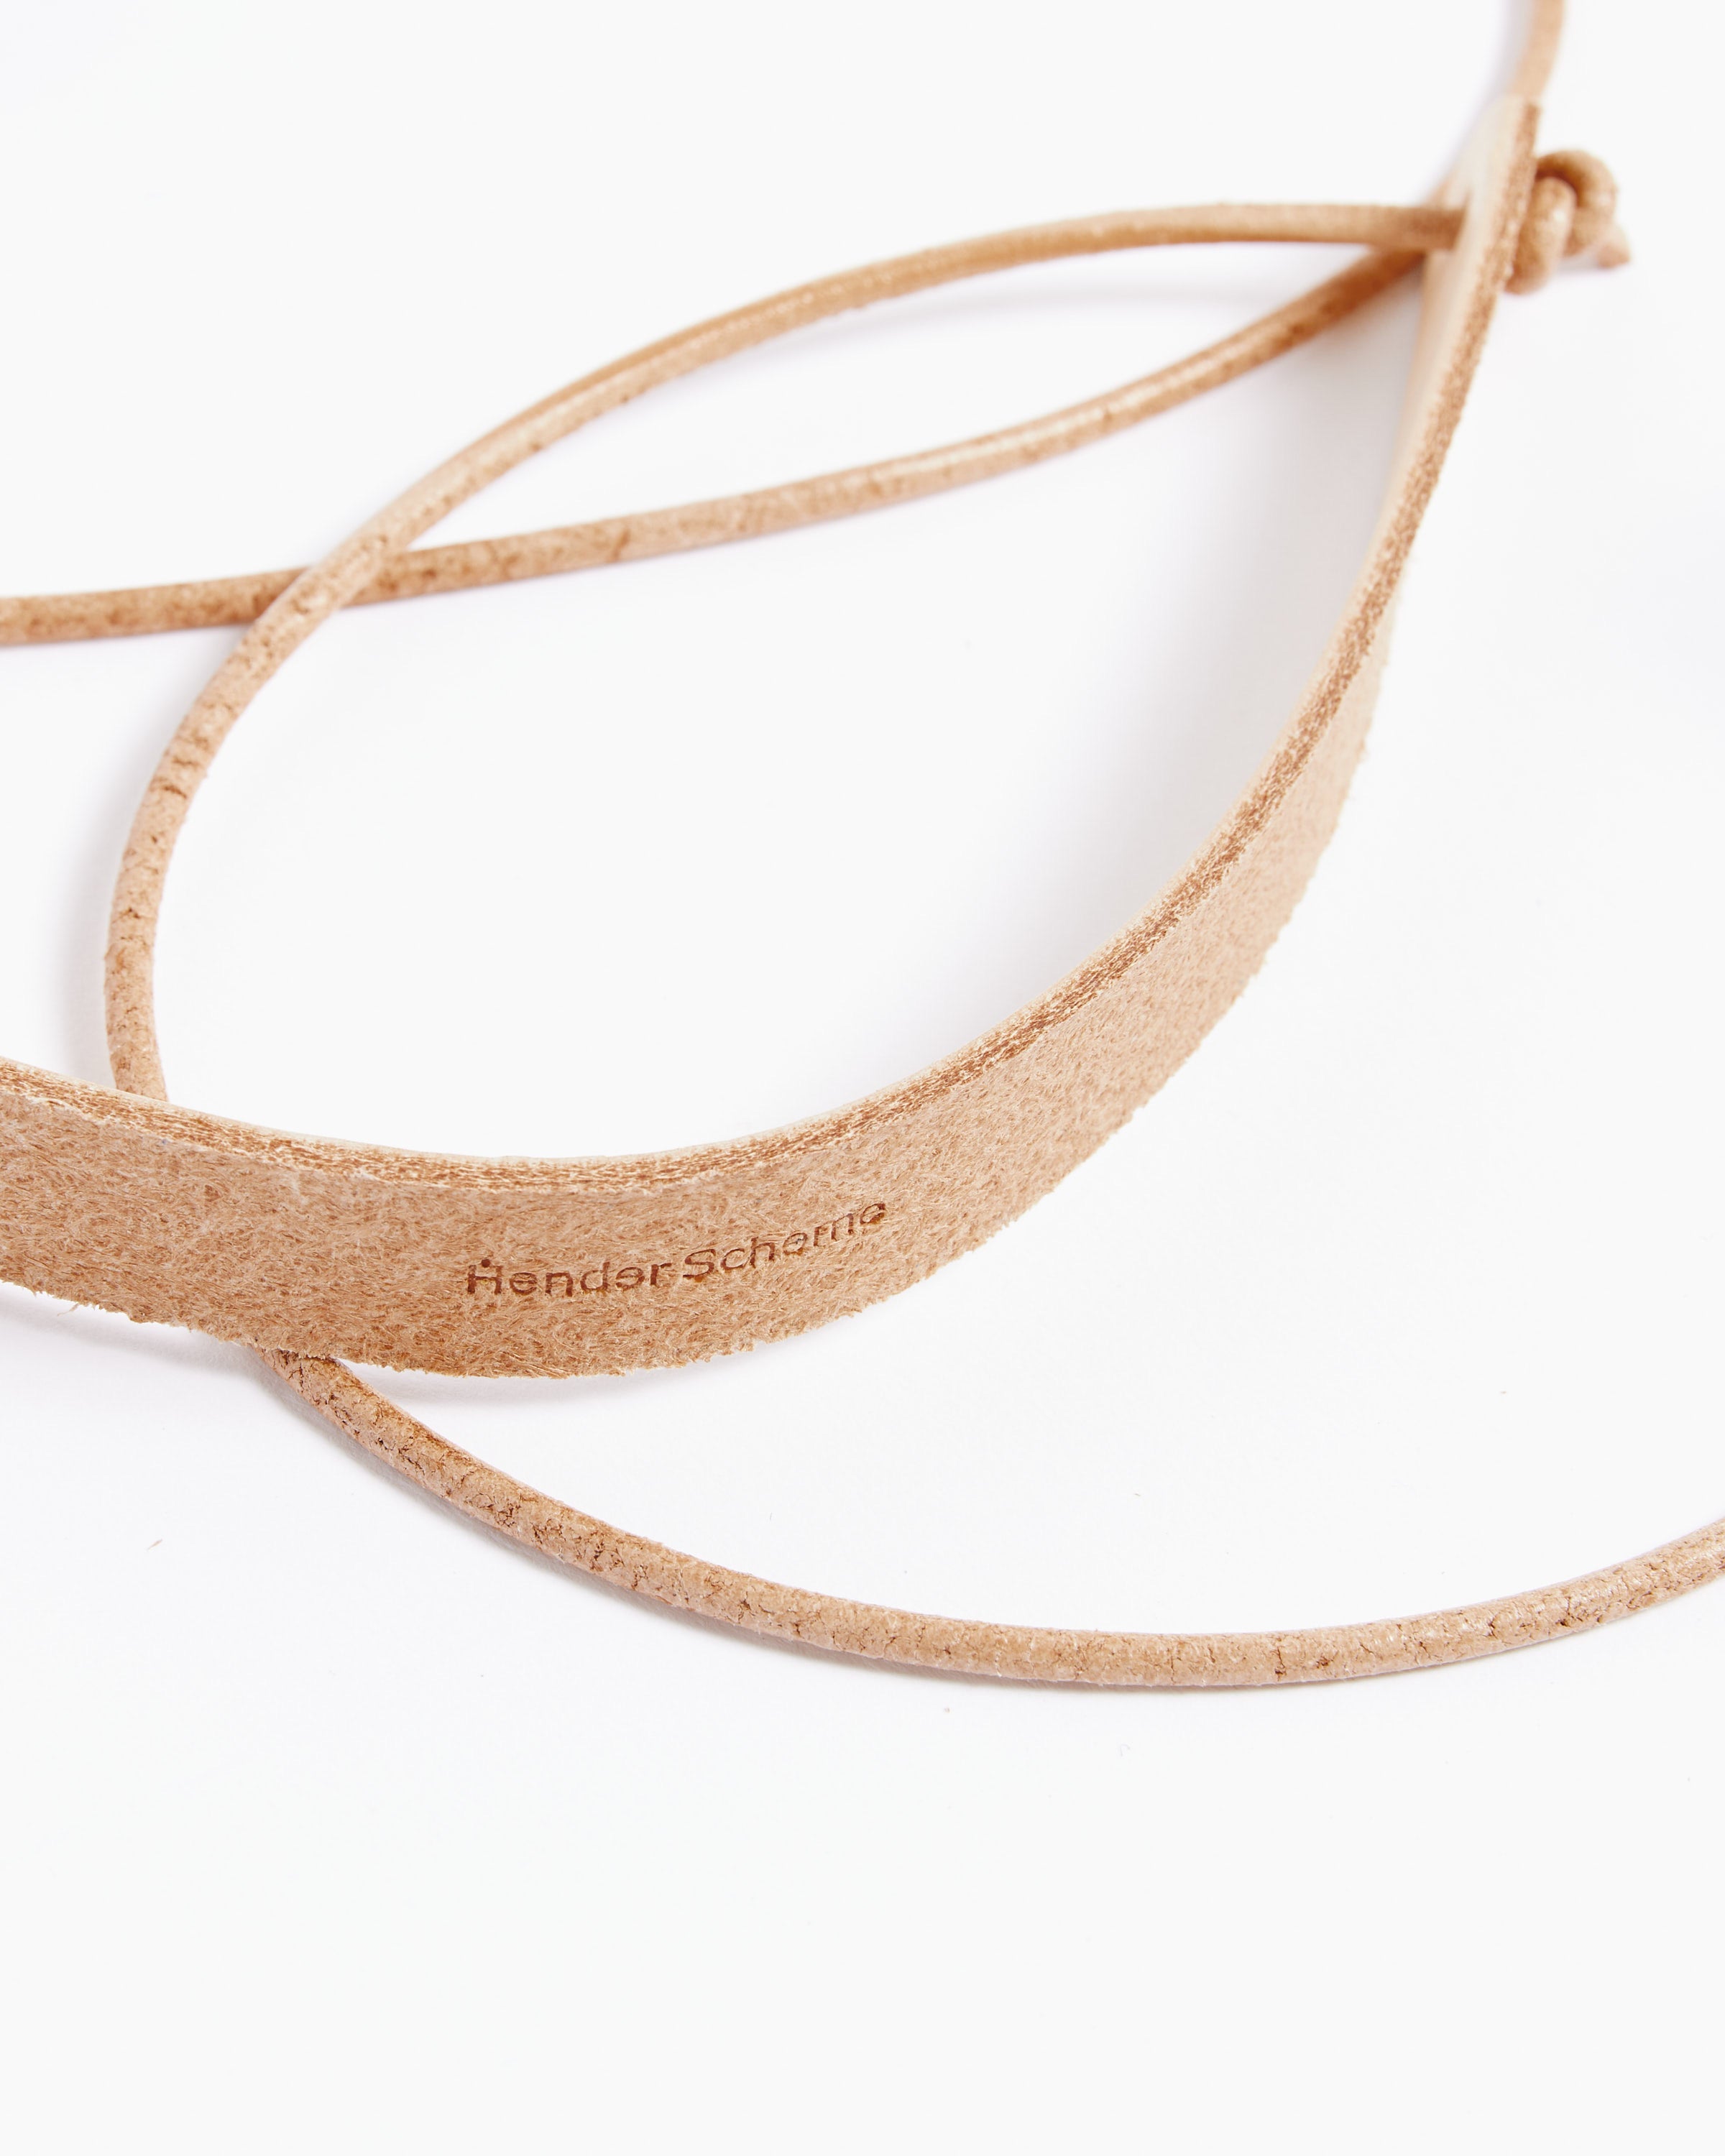 Glasses Cord in Natural